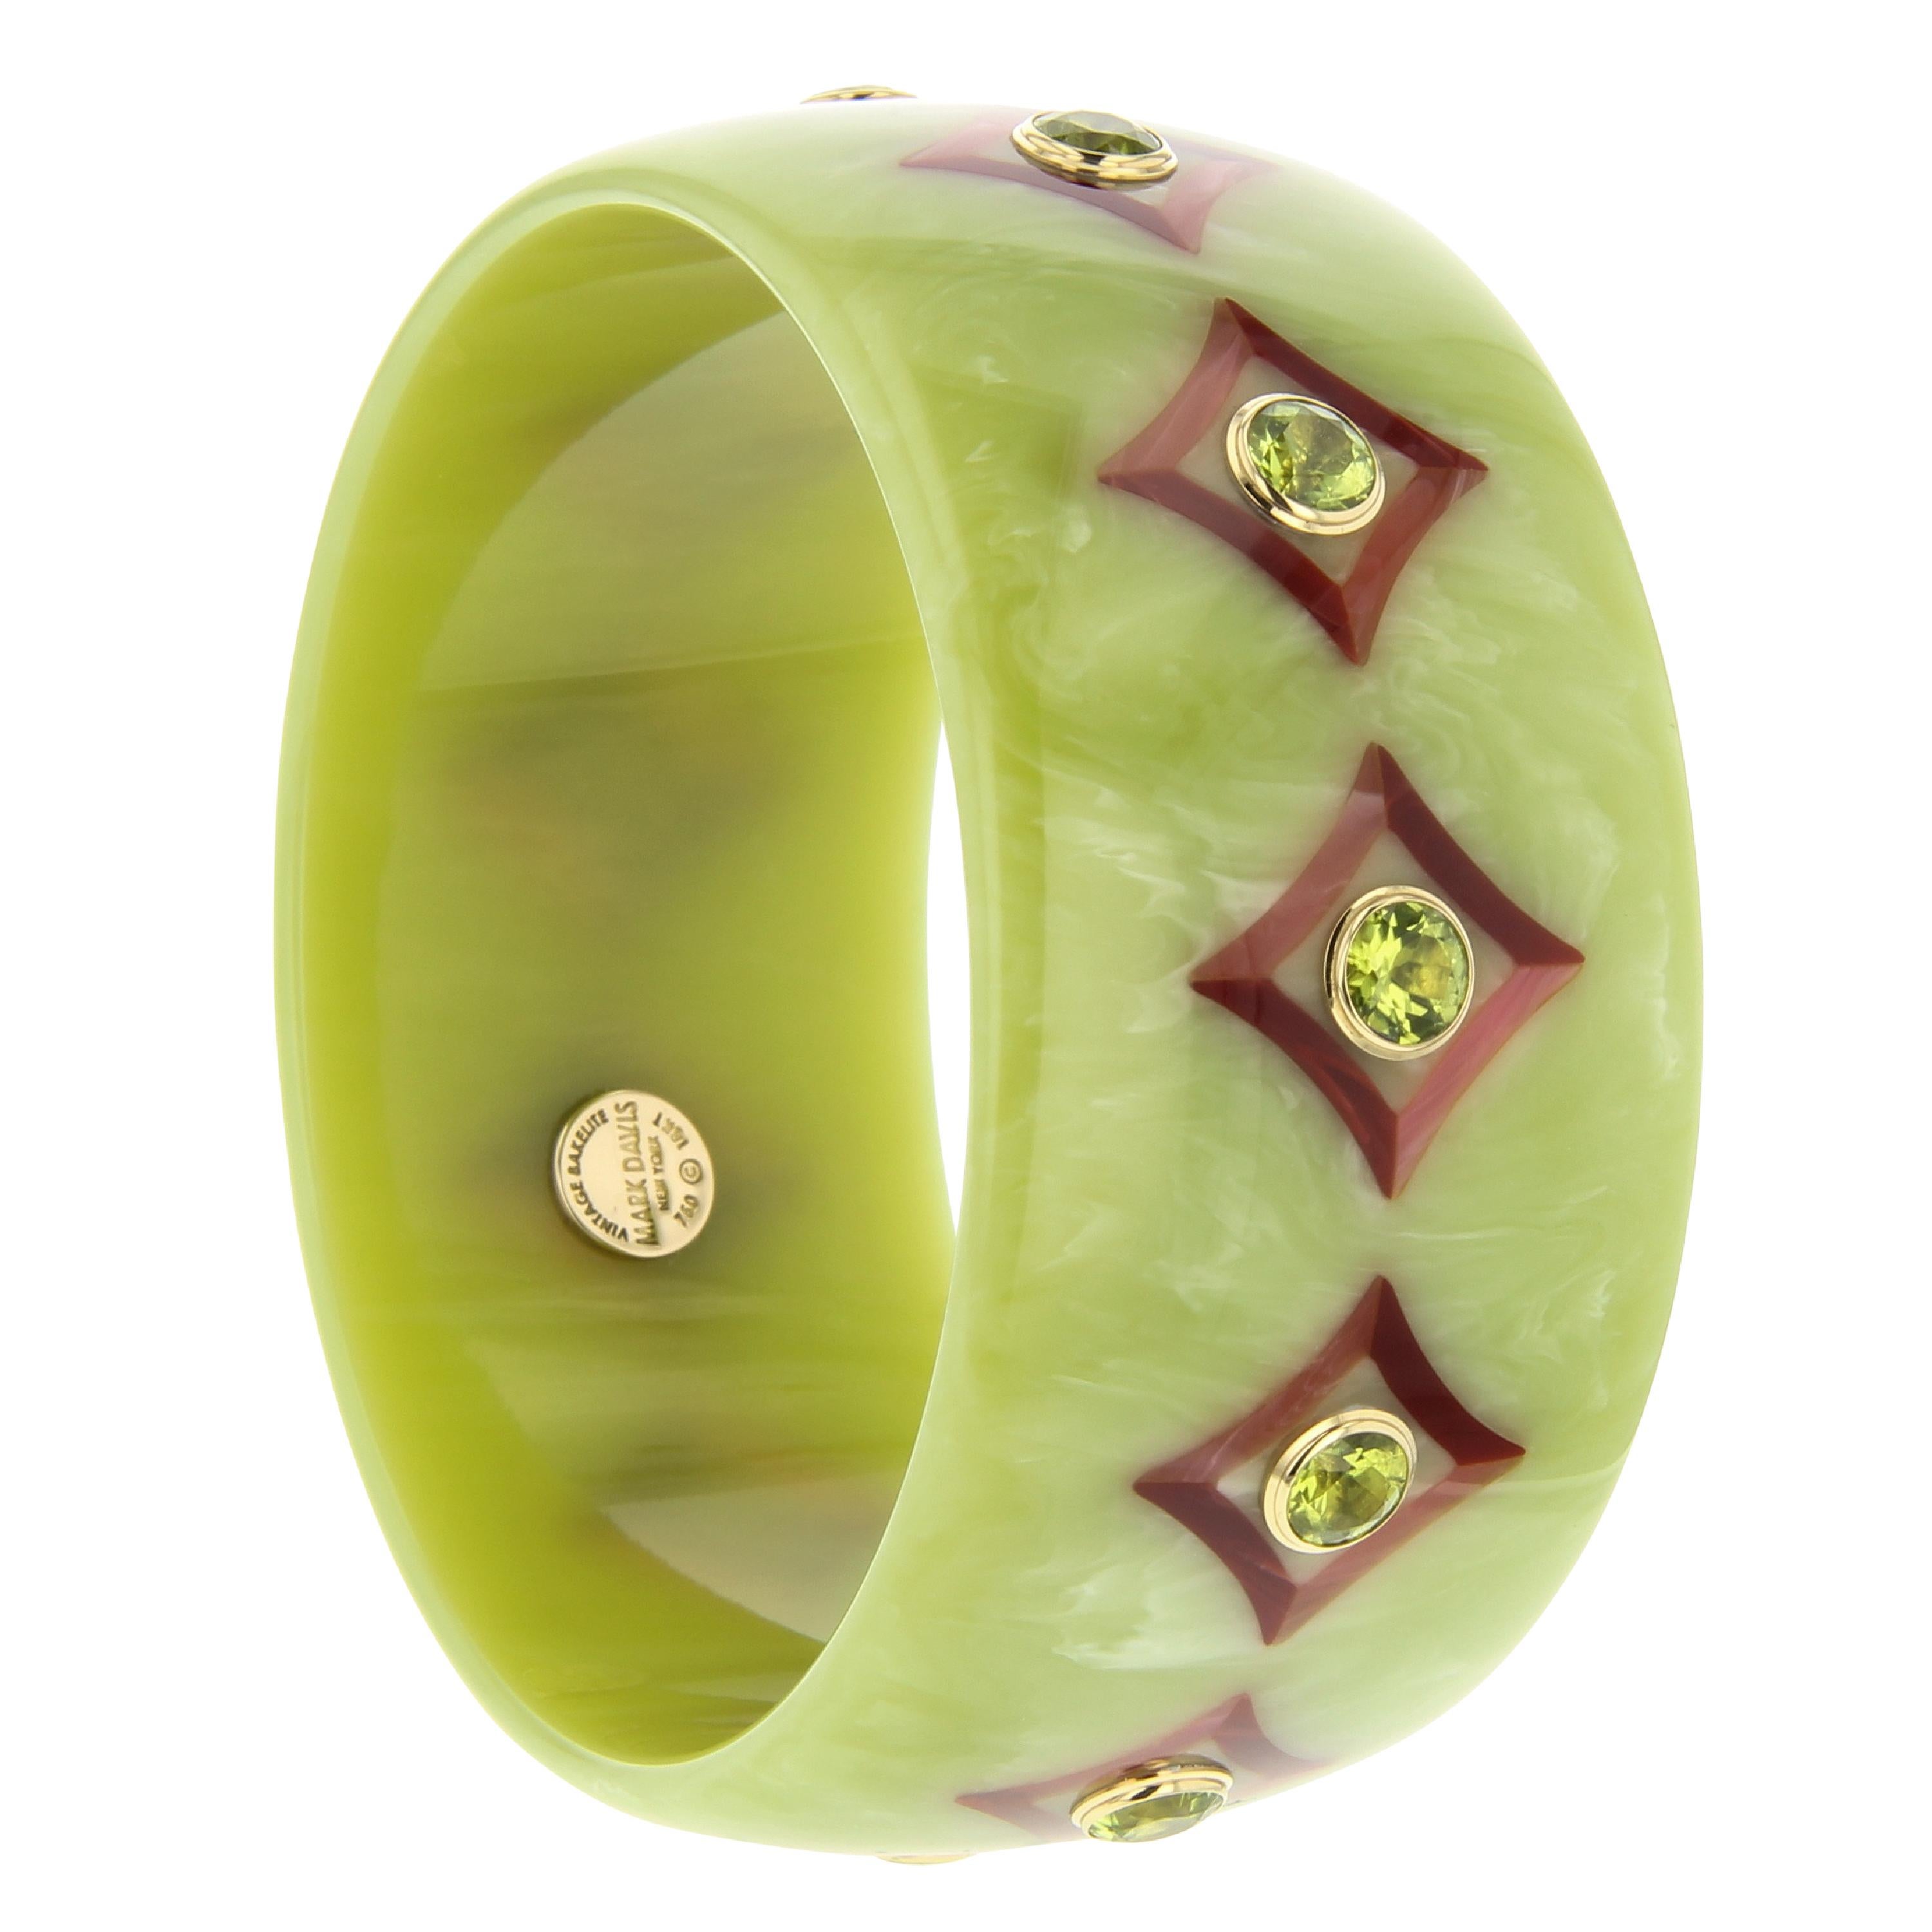 A gorgeous Mark Davis bangle. Made with a beautiful, soft green, vintage bakelite. The bracelet has been inlaid with a diamond or lozenge pattern featuring slightly indented sides. Burgundy and pink bakelite were used for the precise inlay. The